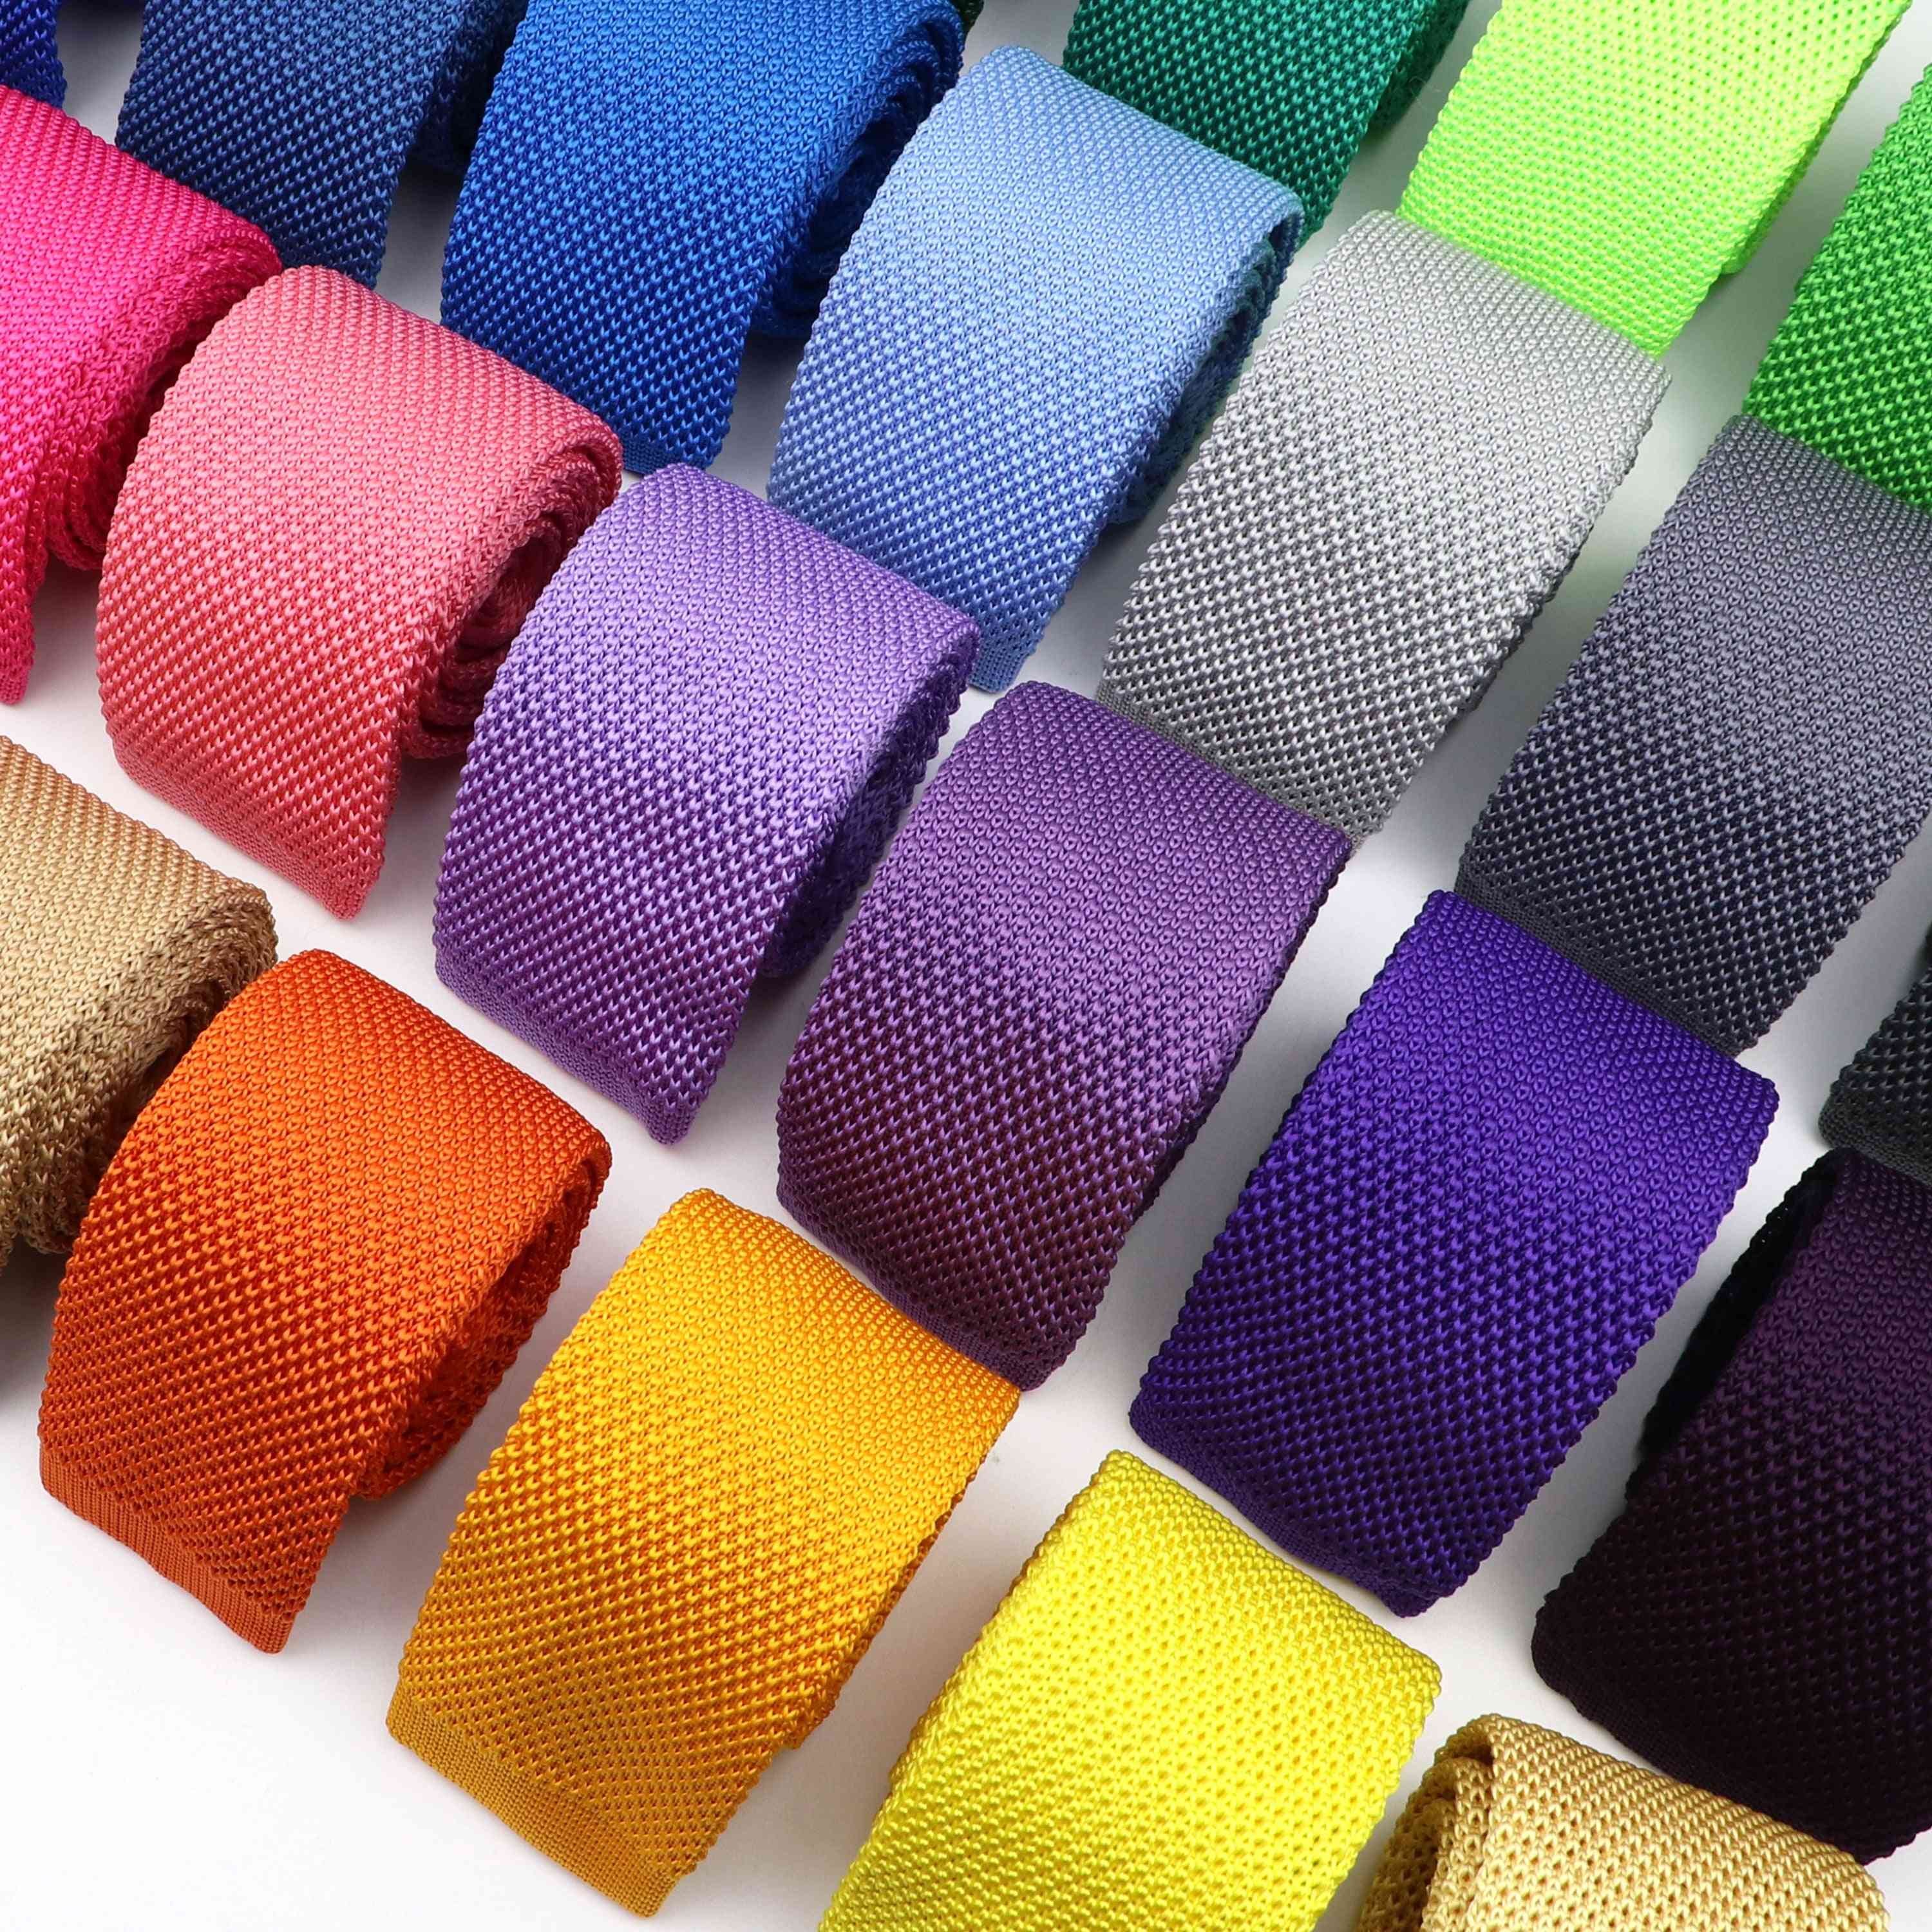 Solid Color Knitted Tie, Leisure Fashion Skinny Narrow Slim Neckties